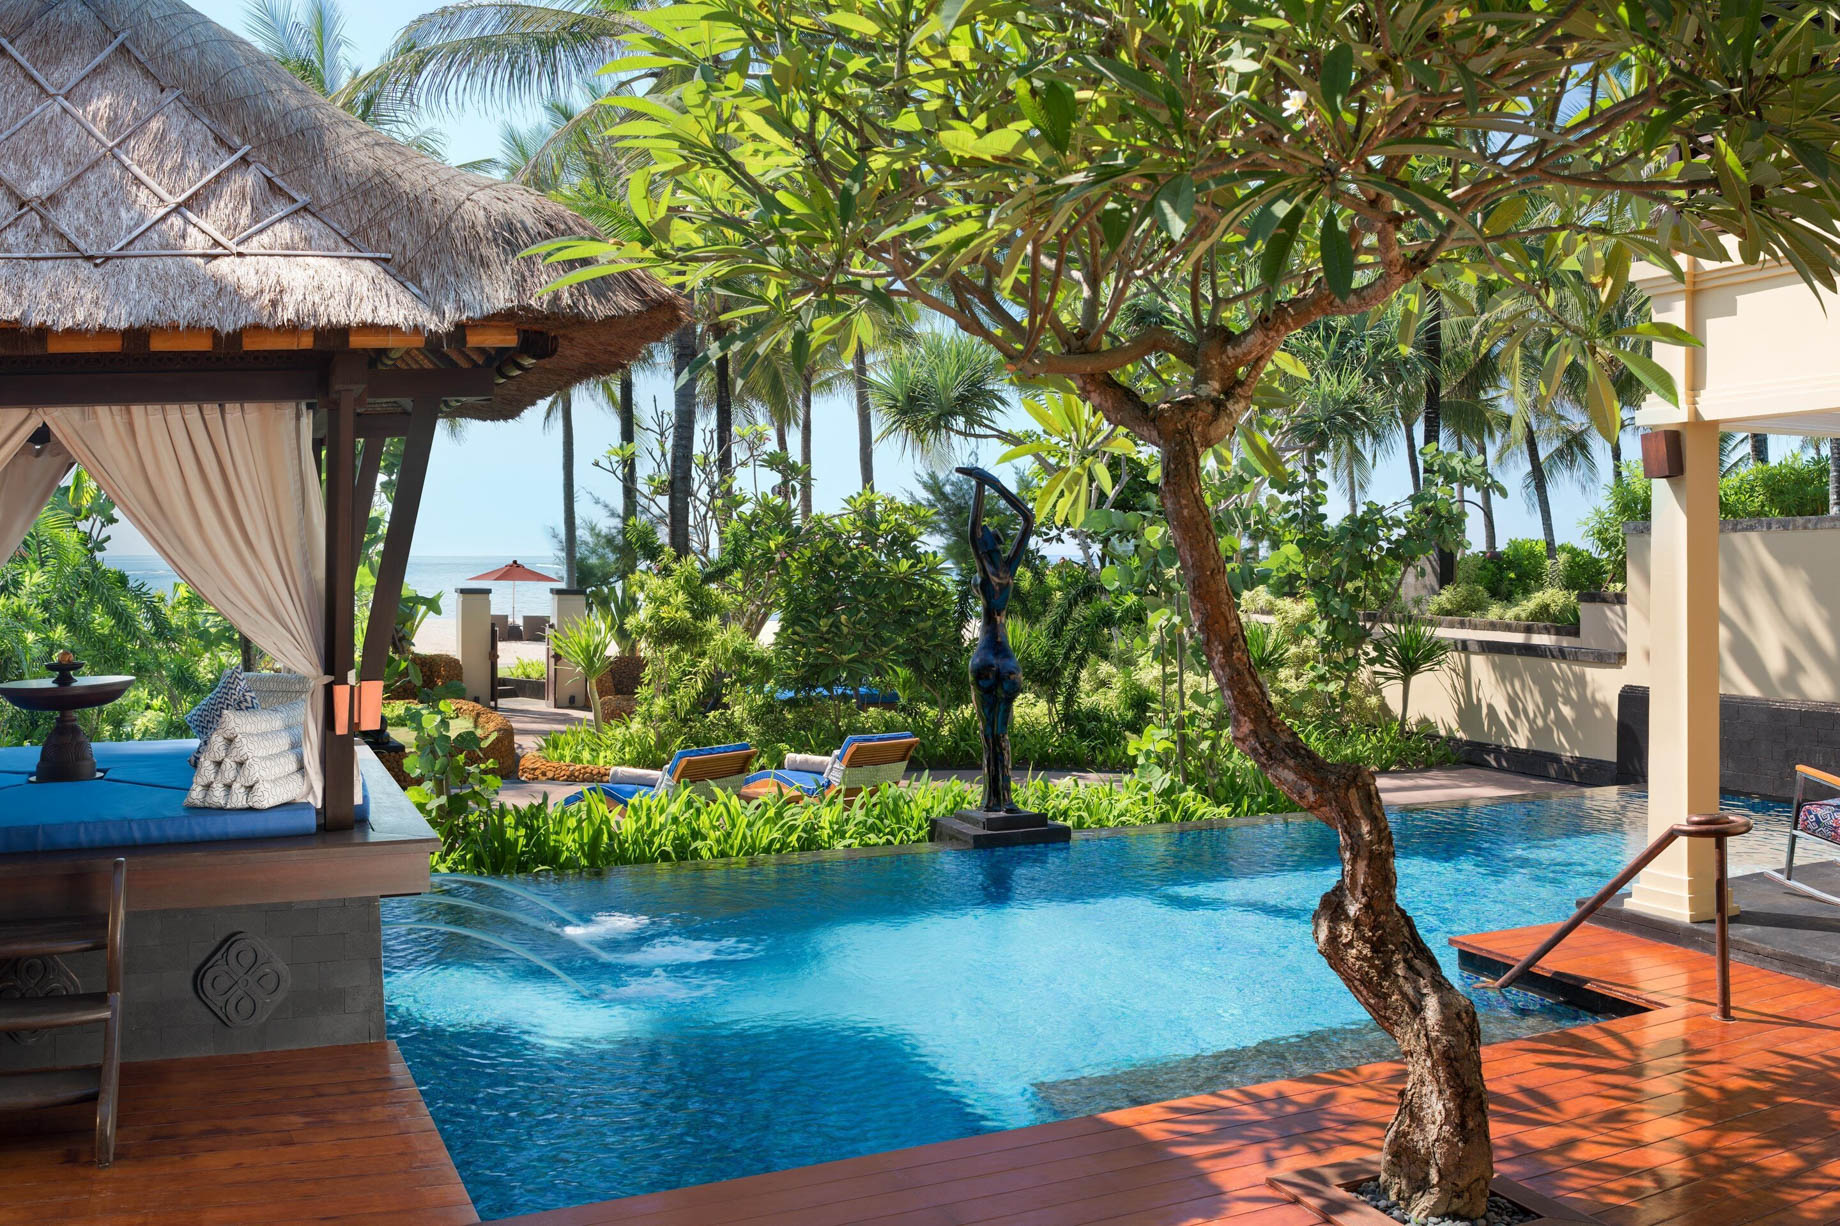 The St. Regis Bali Resort – Bali, Indonesia – Strand Residence Guest Room Pool and Garden